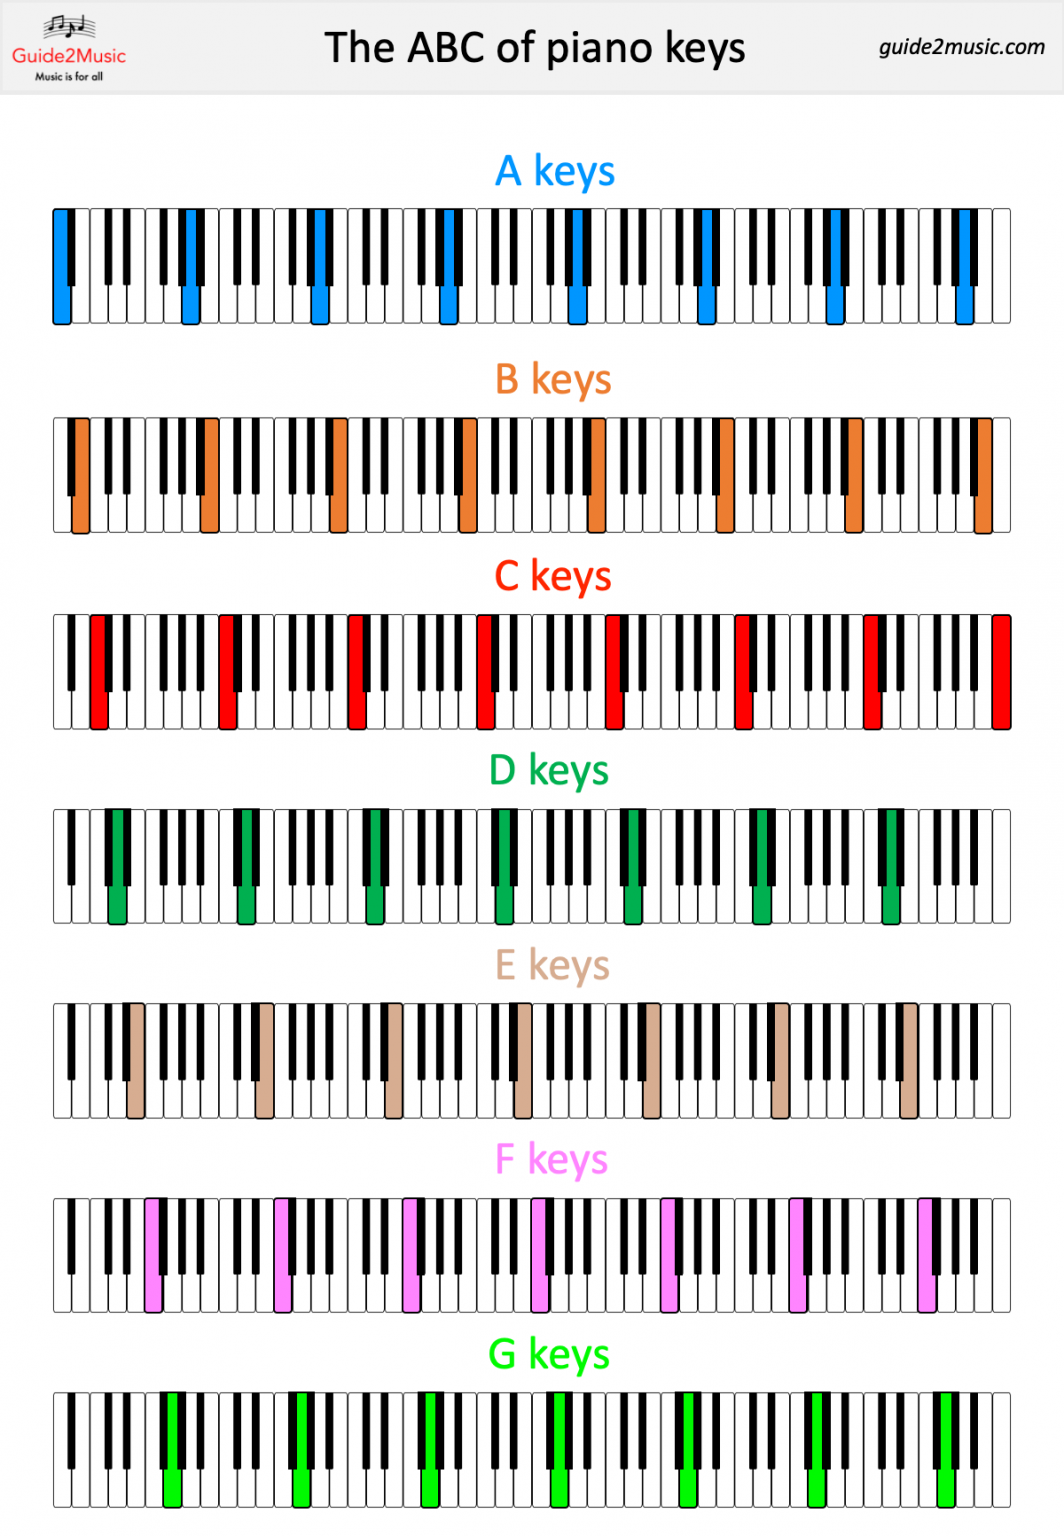 88 piano keys and notes: get to know your keyboard Guide2music